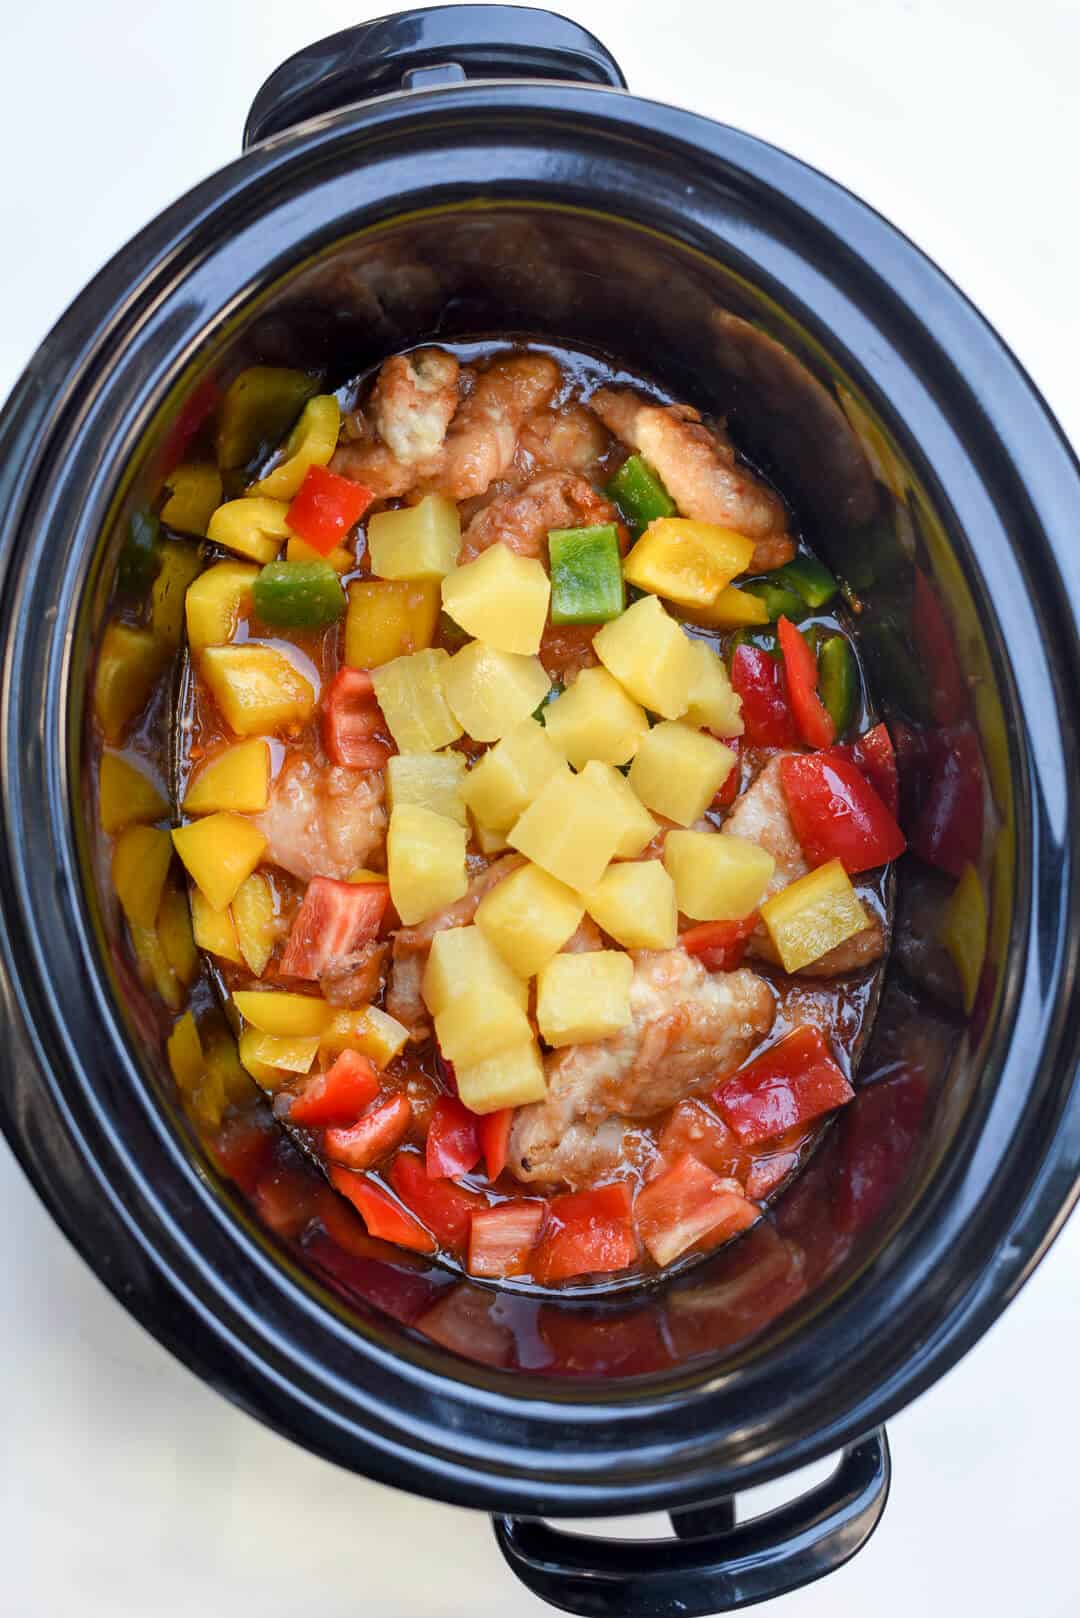 Chunks of pineapple are added to the slow cooker.